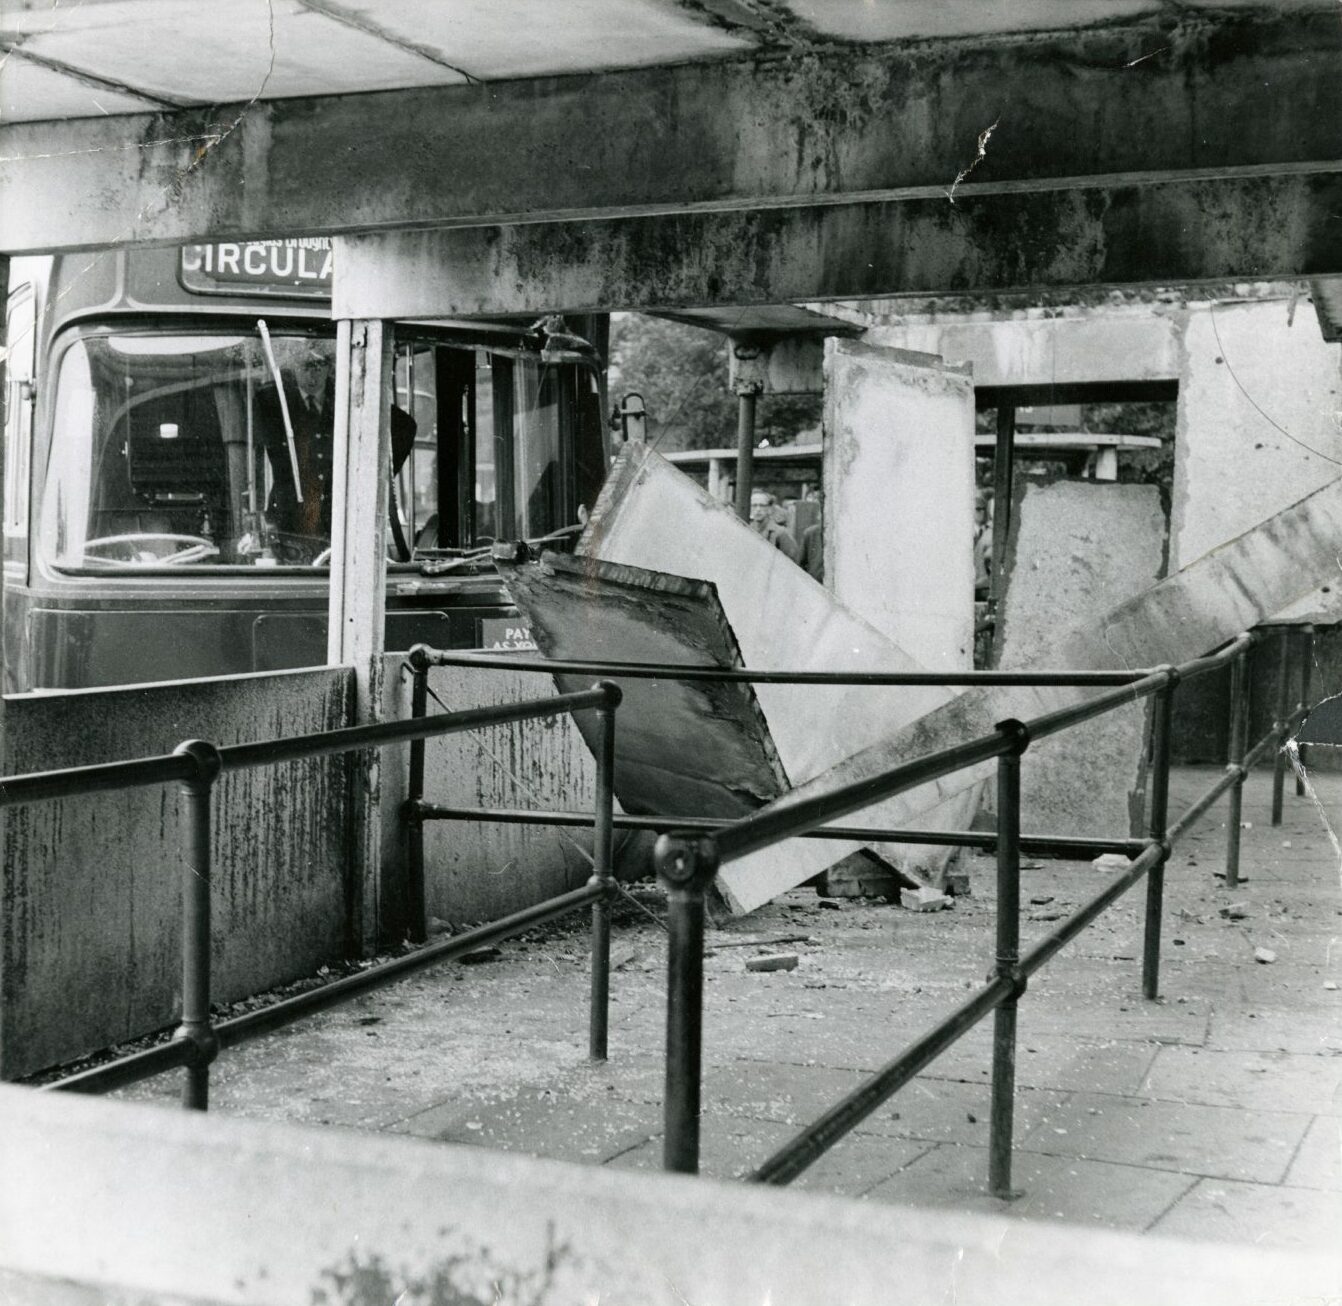 The damaged bus shelter at Shore Terrace following the tragedy in 1972. Image: DC Thomson.